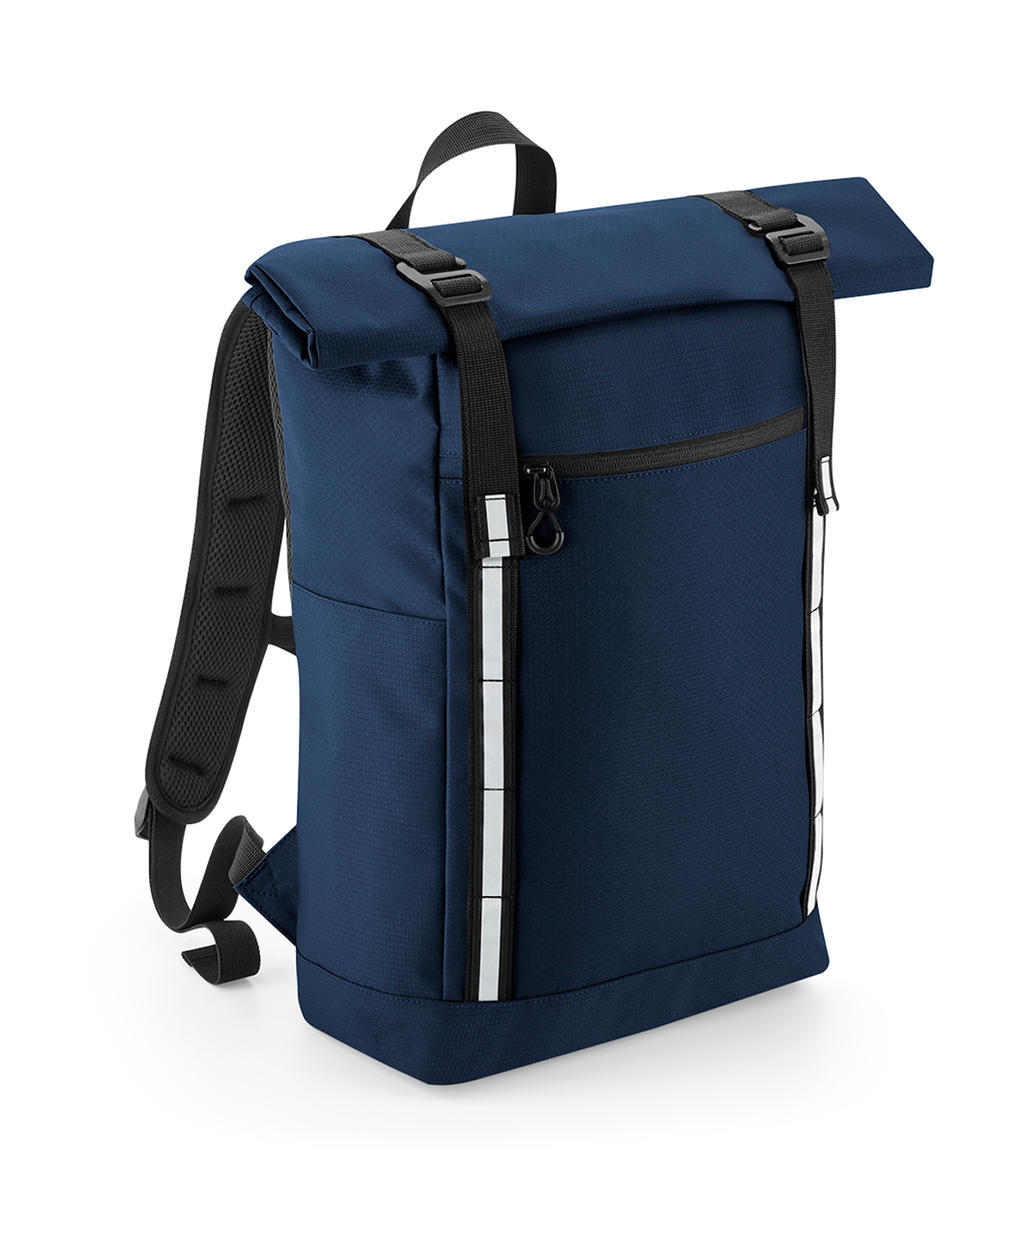  Urban Commute Backpack in Farbe Navy